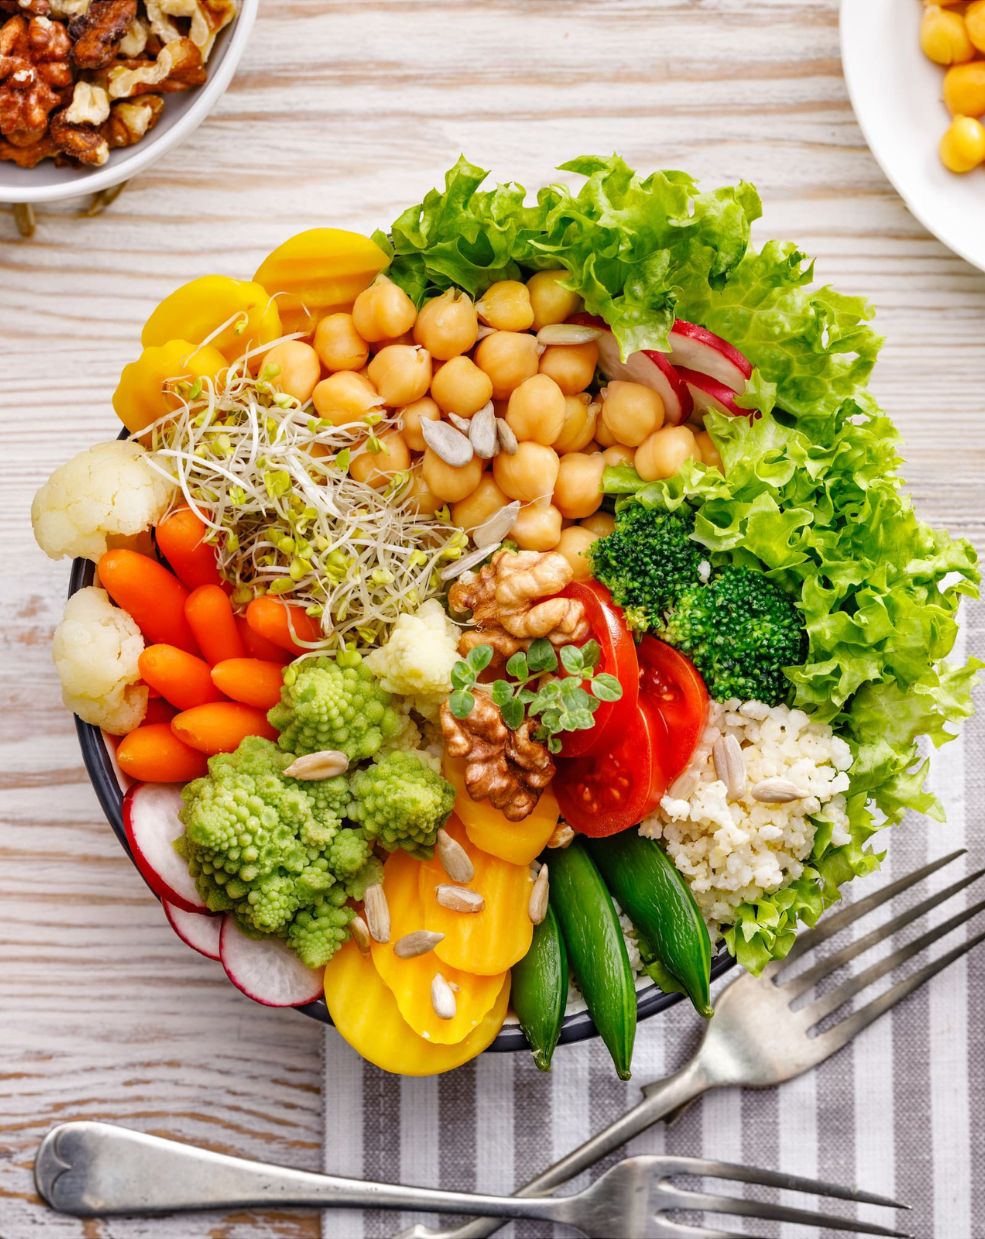 Plant-Based Foods for Weight Loss and Health